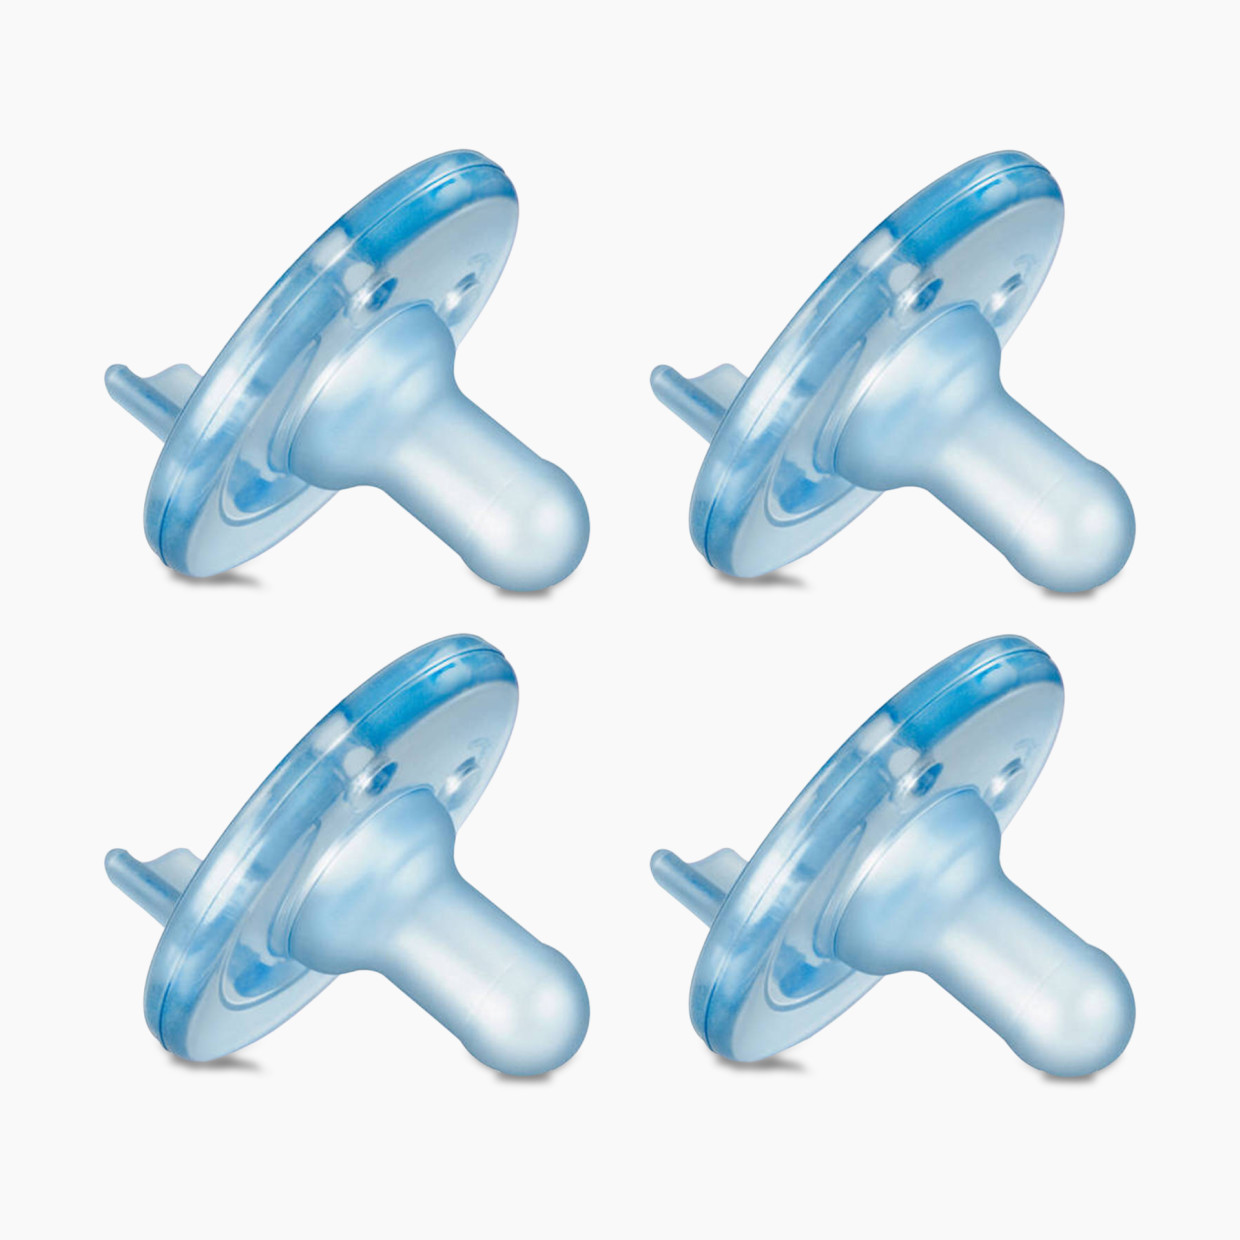 Philips Avent Soothie Pacifier, 0-3 months (4 Pack) - Blue.